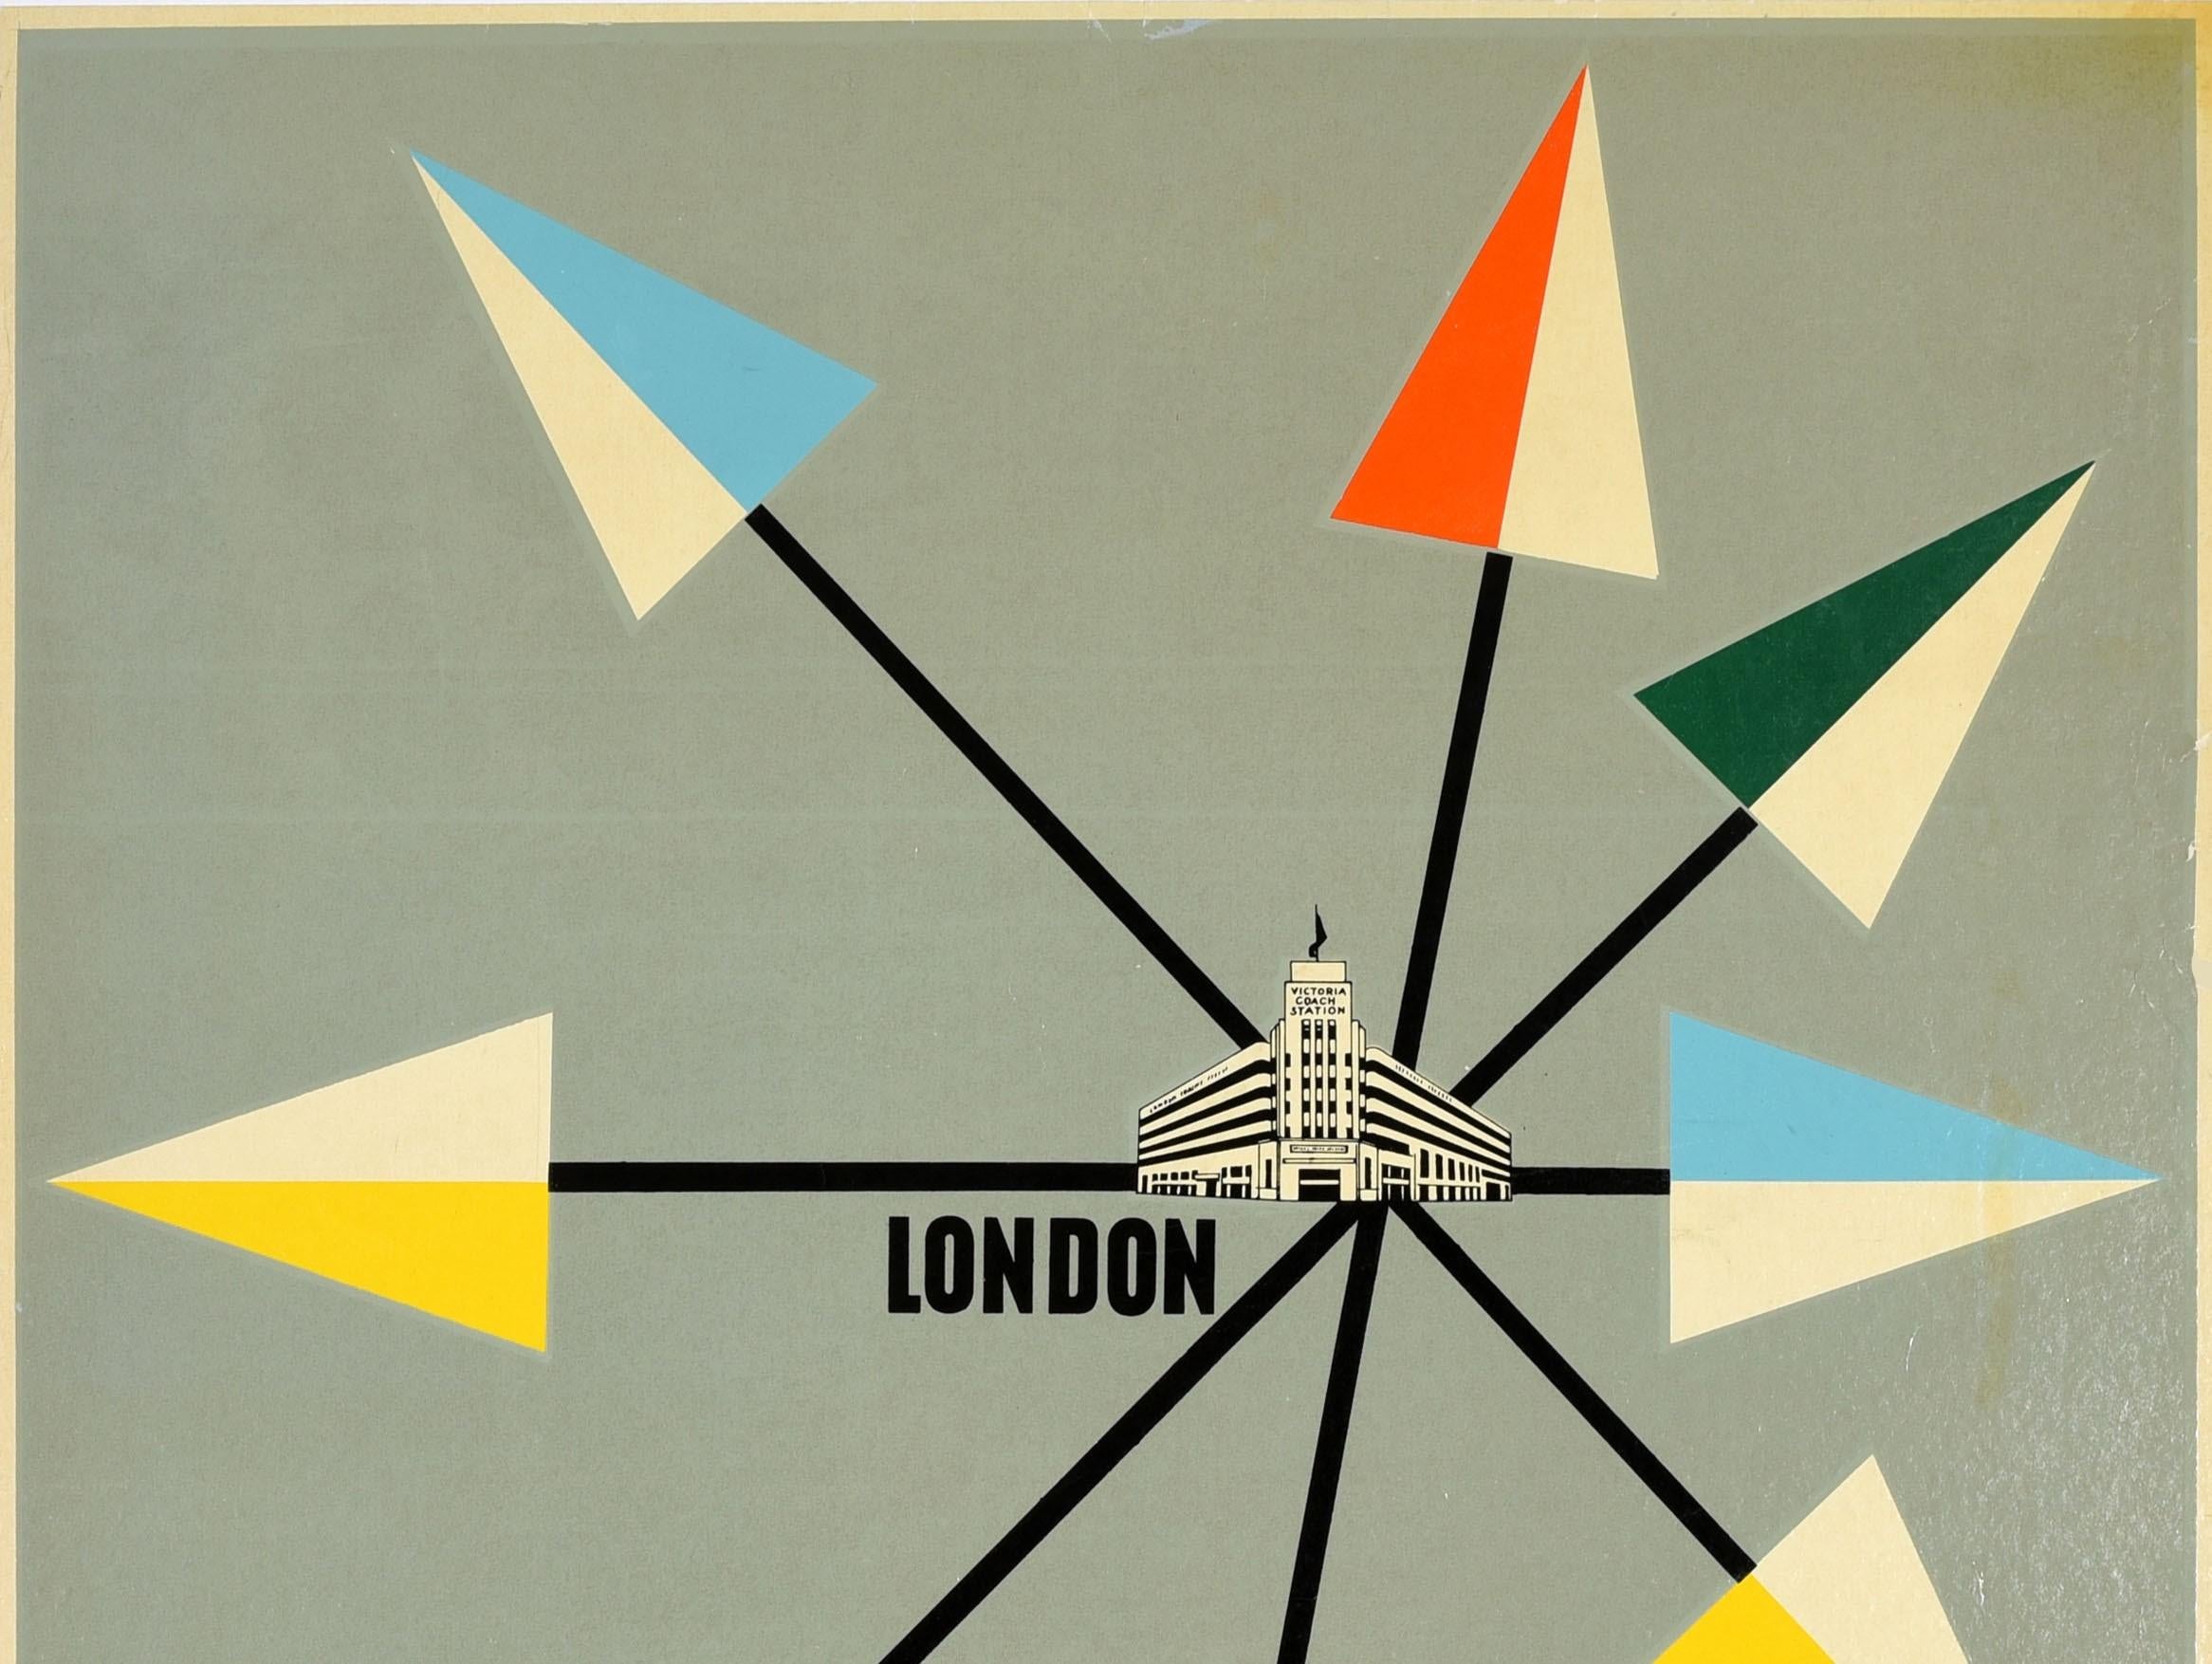 Original vintage travel poster - For your journey from London onwards many connecting services from Victoria Coach Station - featuring a great mid-century modern illustration of the Art Deco architecture style Victoria Coach Station (opened 1932)